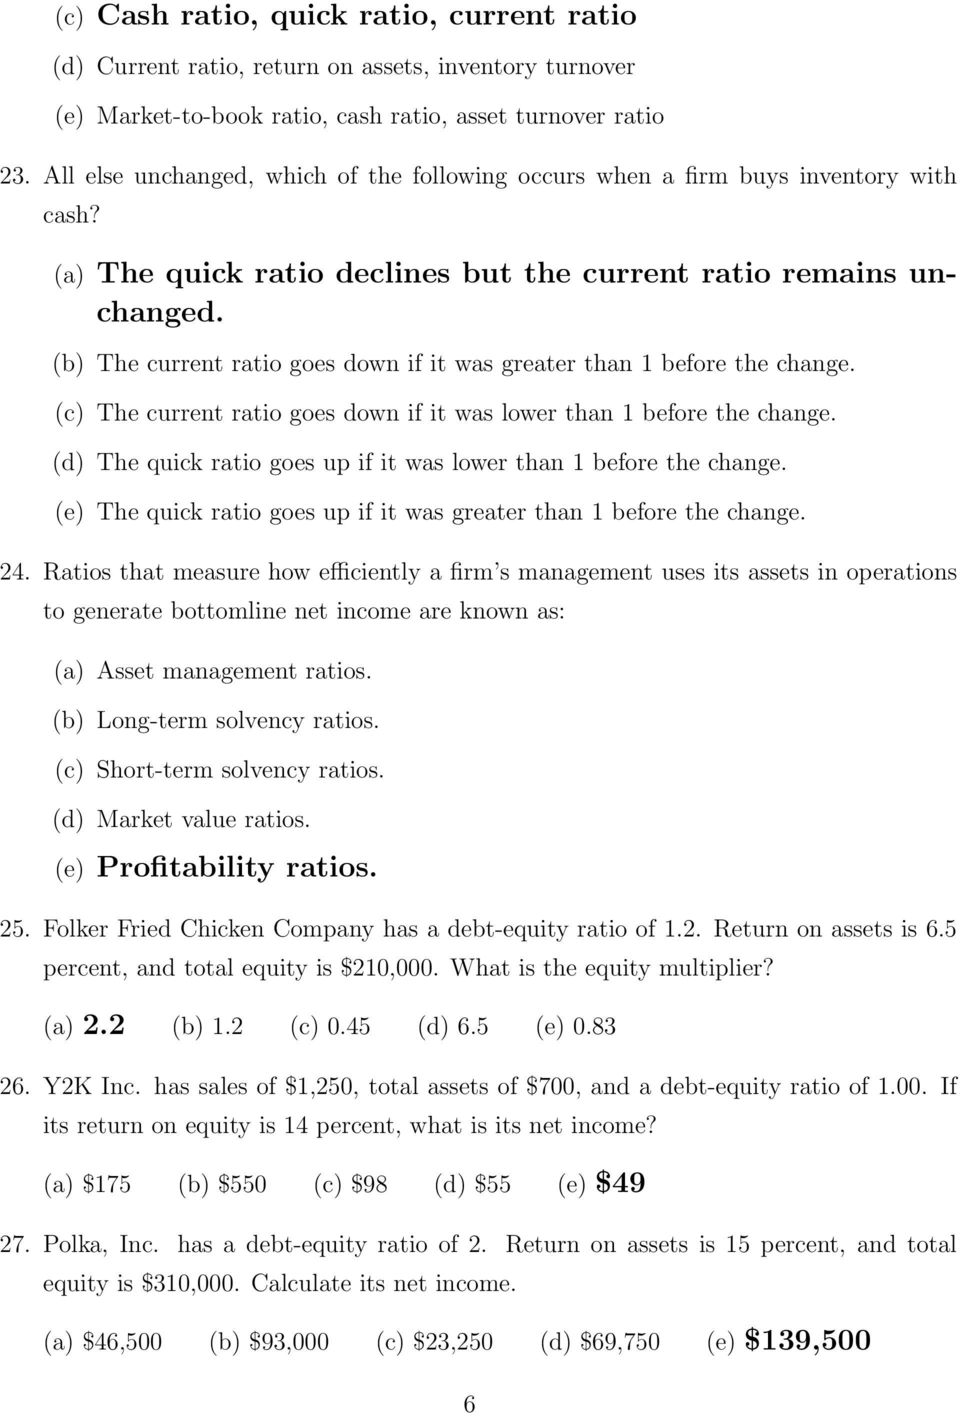 (b) The current ratio goes down if it was greater than 1 before the change. (c) The current ratio goes down if it was lower than 1 before the change.